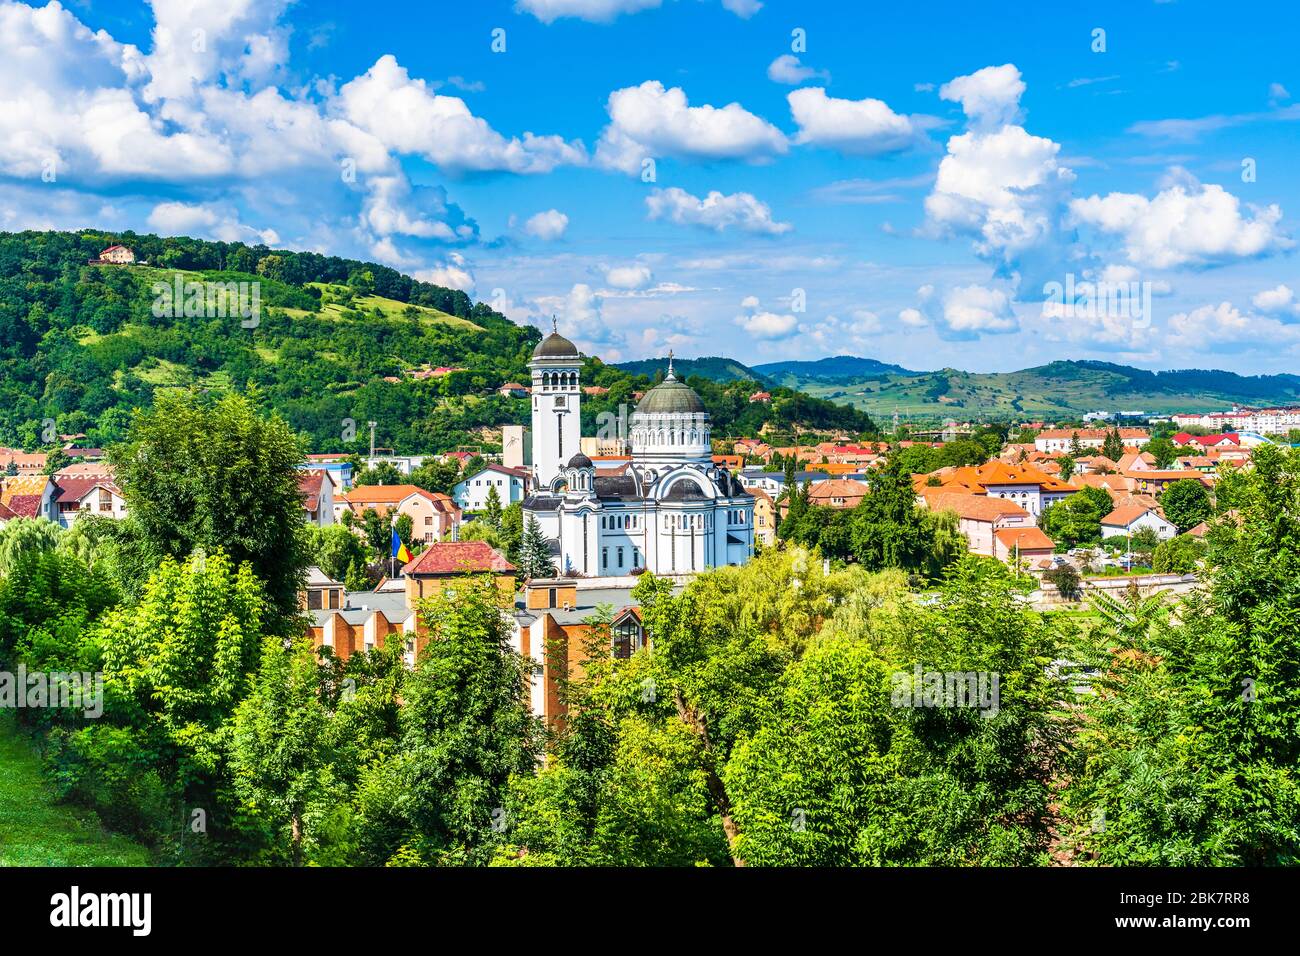 Sighisoara, Mures County, Transilvania, Romania: Landscape of The Holy Trinity (Stanta Treime) Orthodox church with the roof tops of surrounding homes Stock Photo